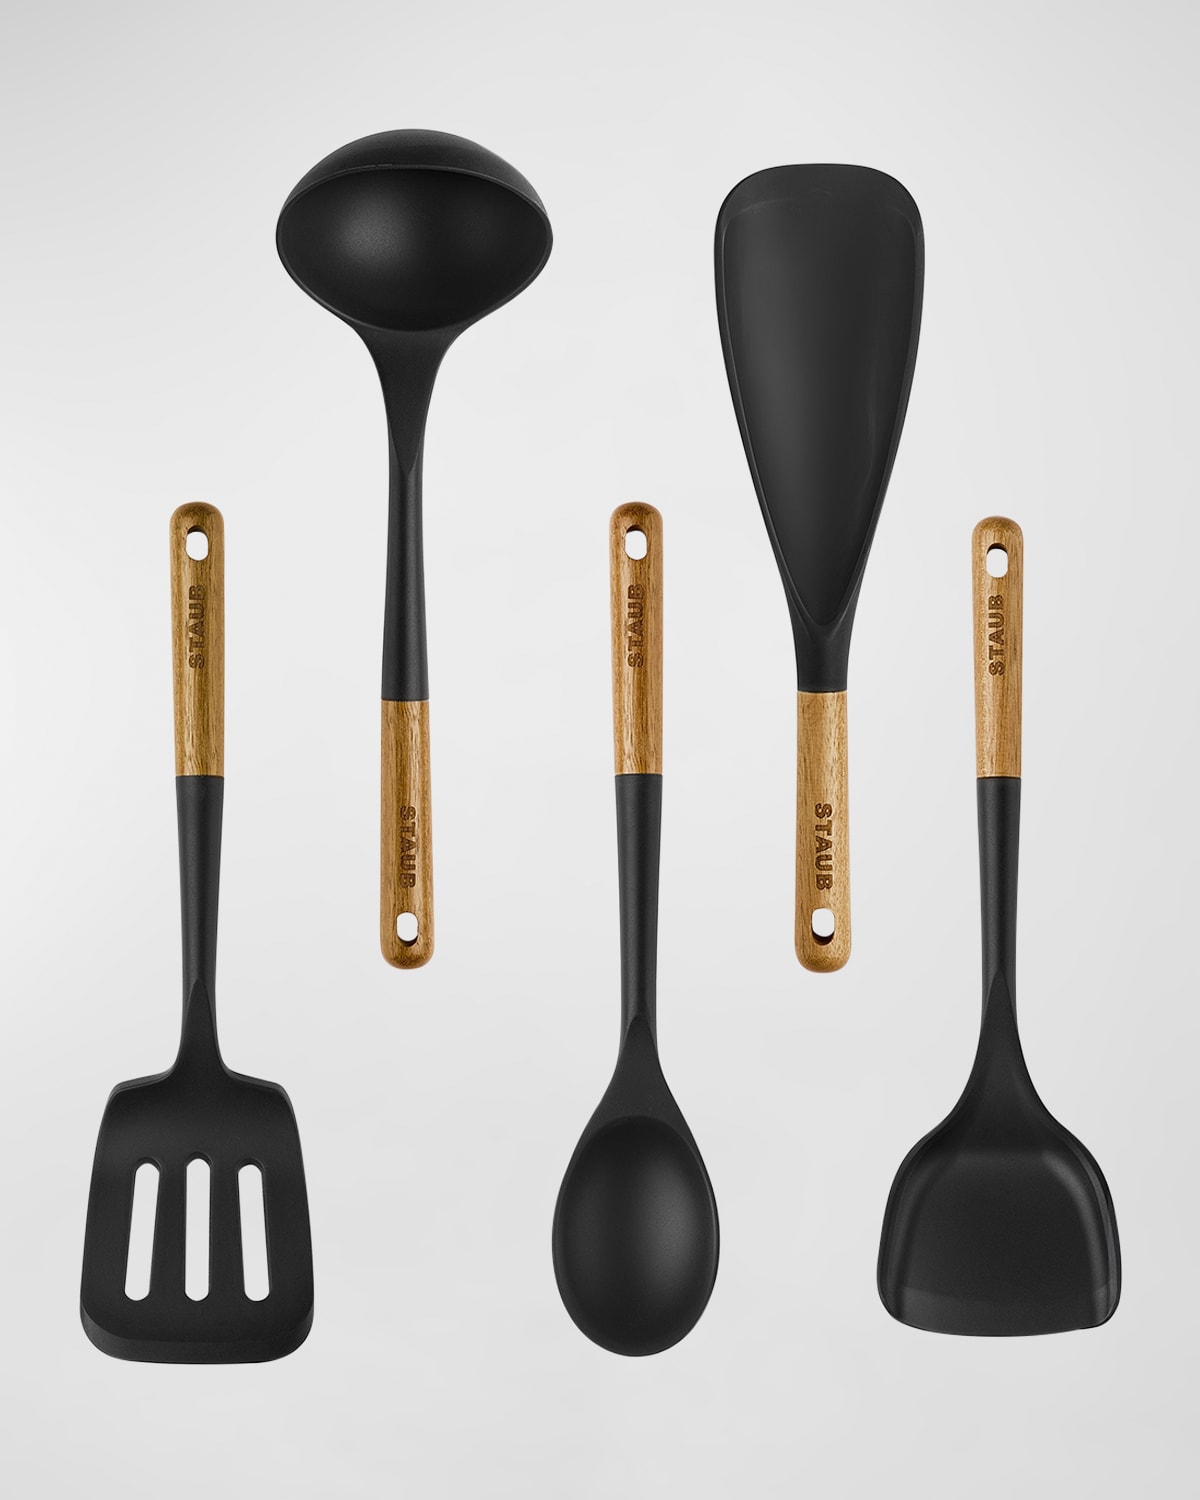 Staub 5-piece Silicone & Wood Handle Cooking Utensil Set In Black